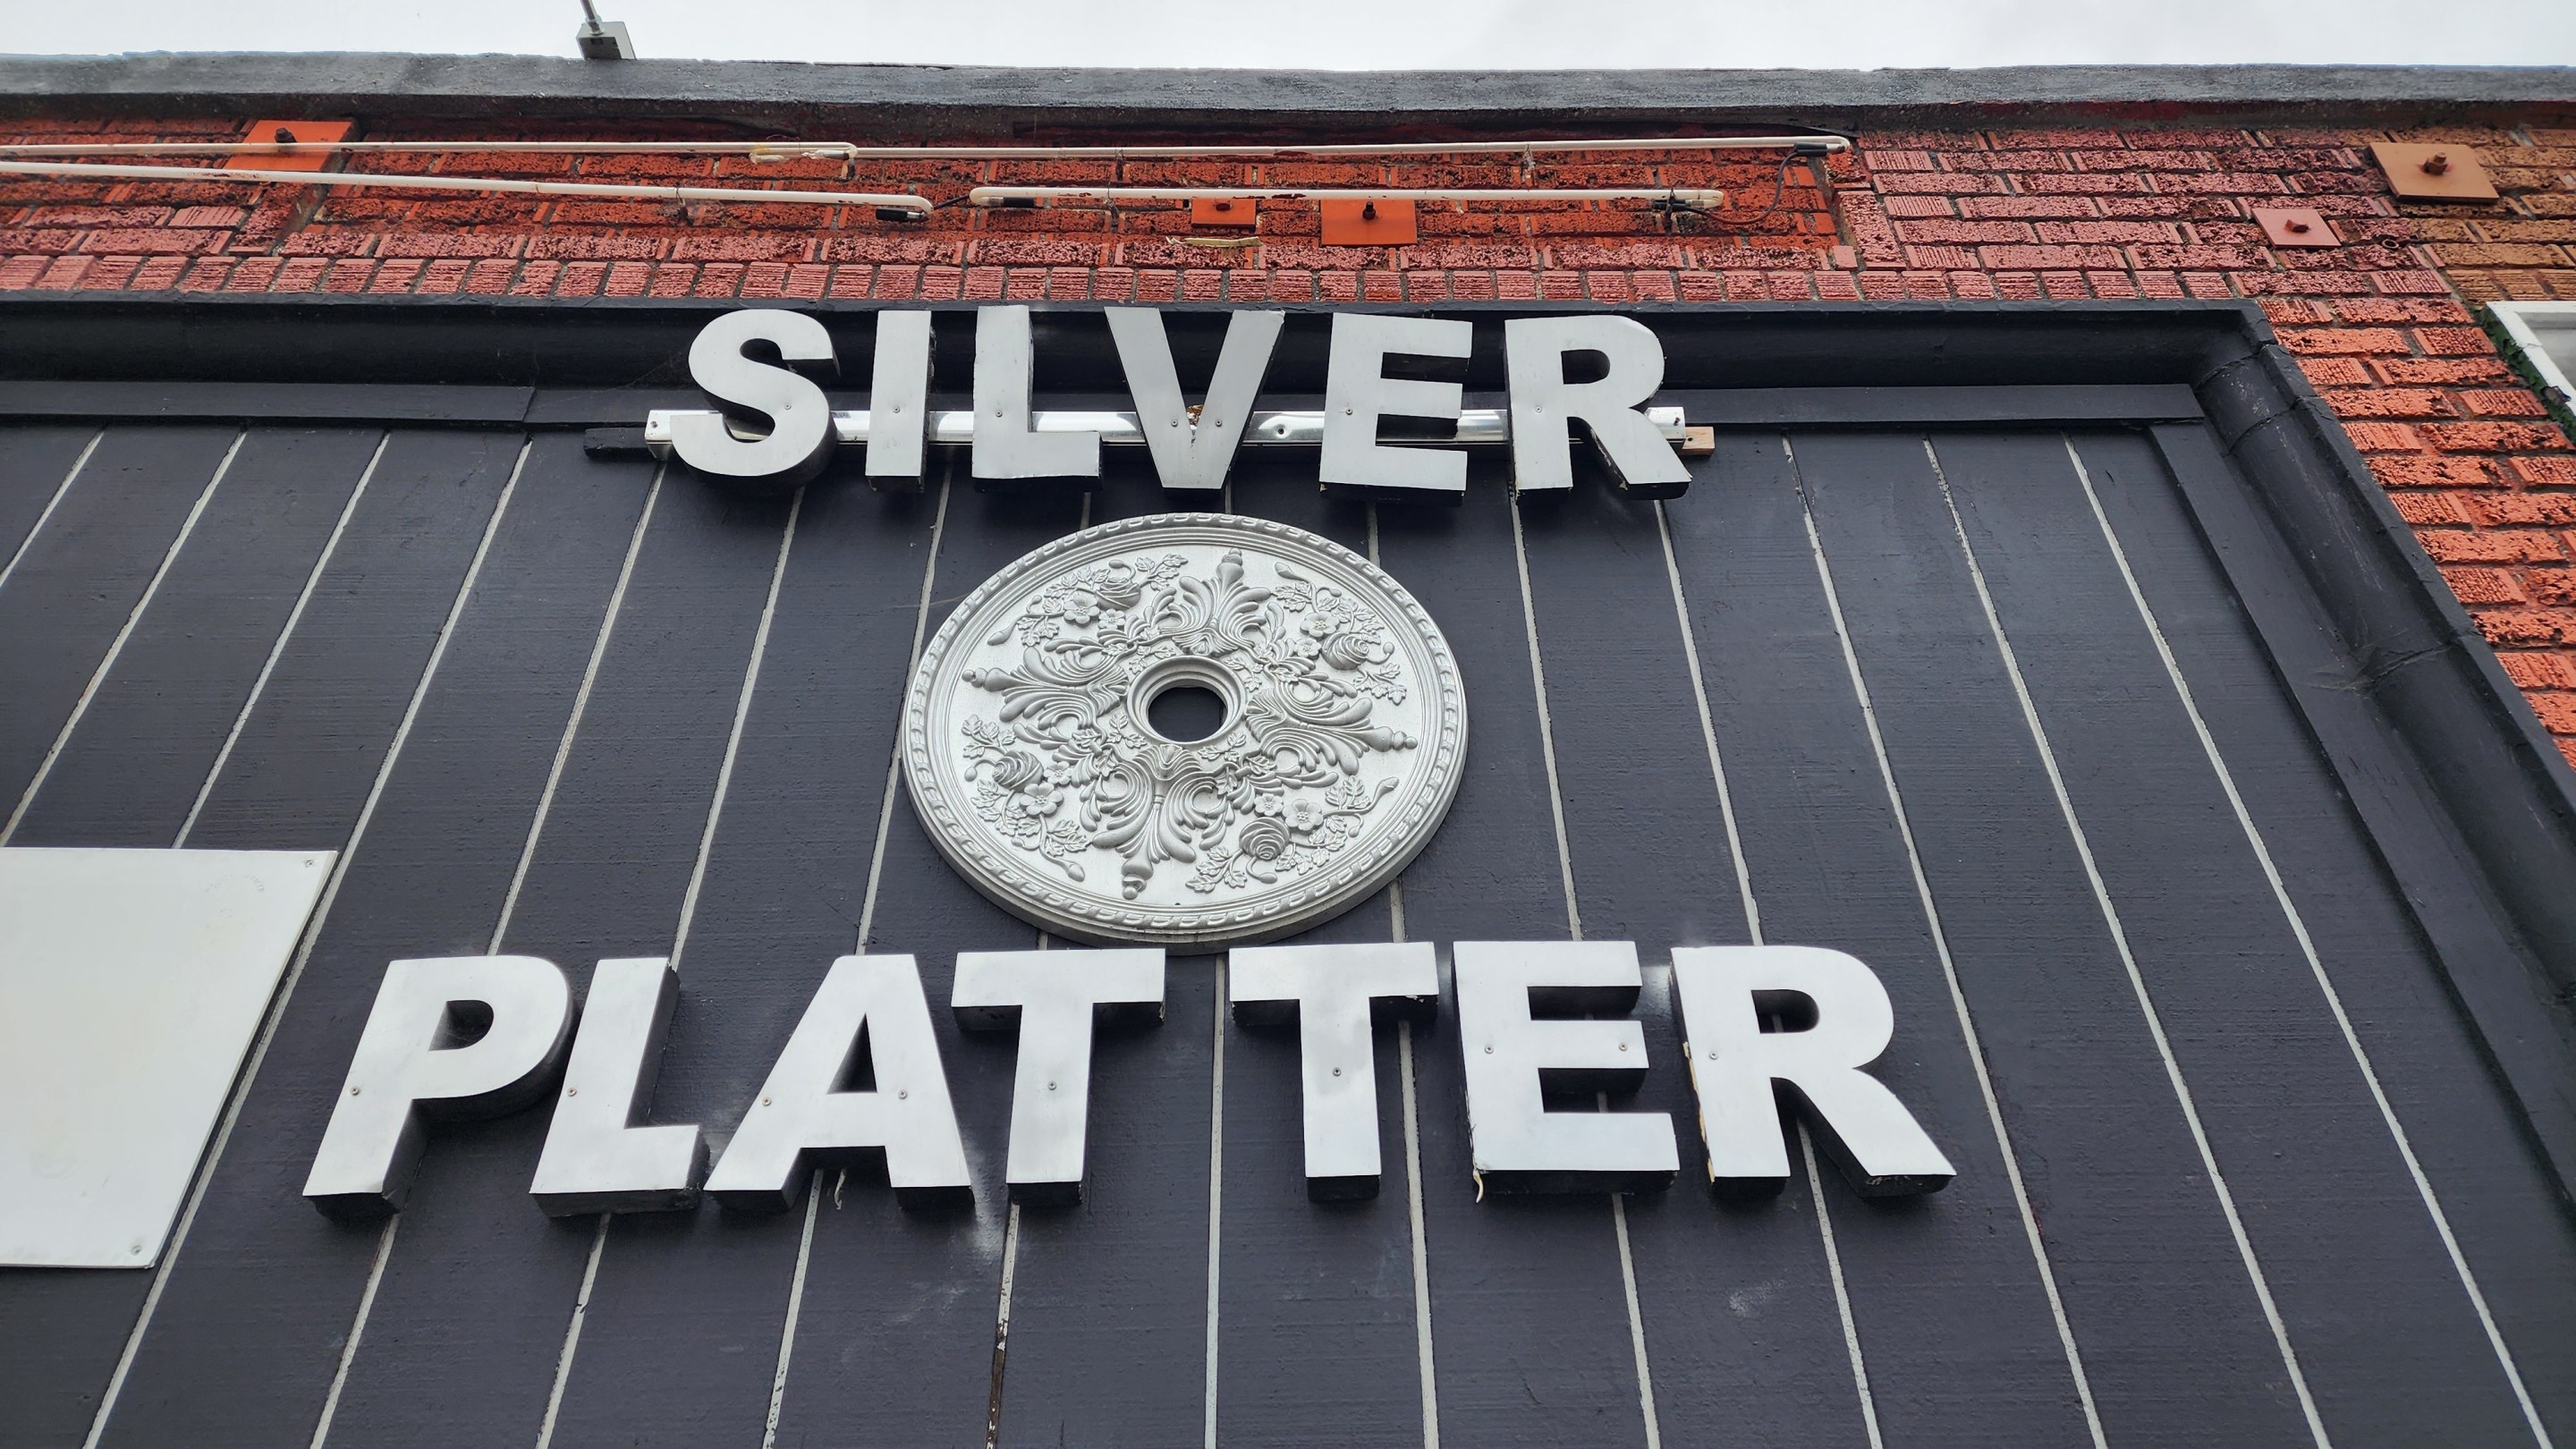 The words silver and platter with an emblem between them featured on the front of the Silver Platter on 7th Street.